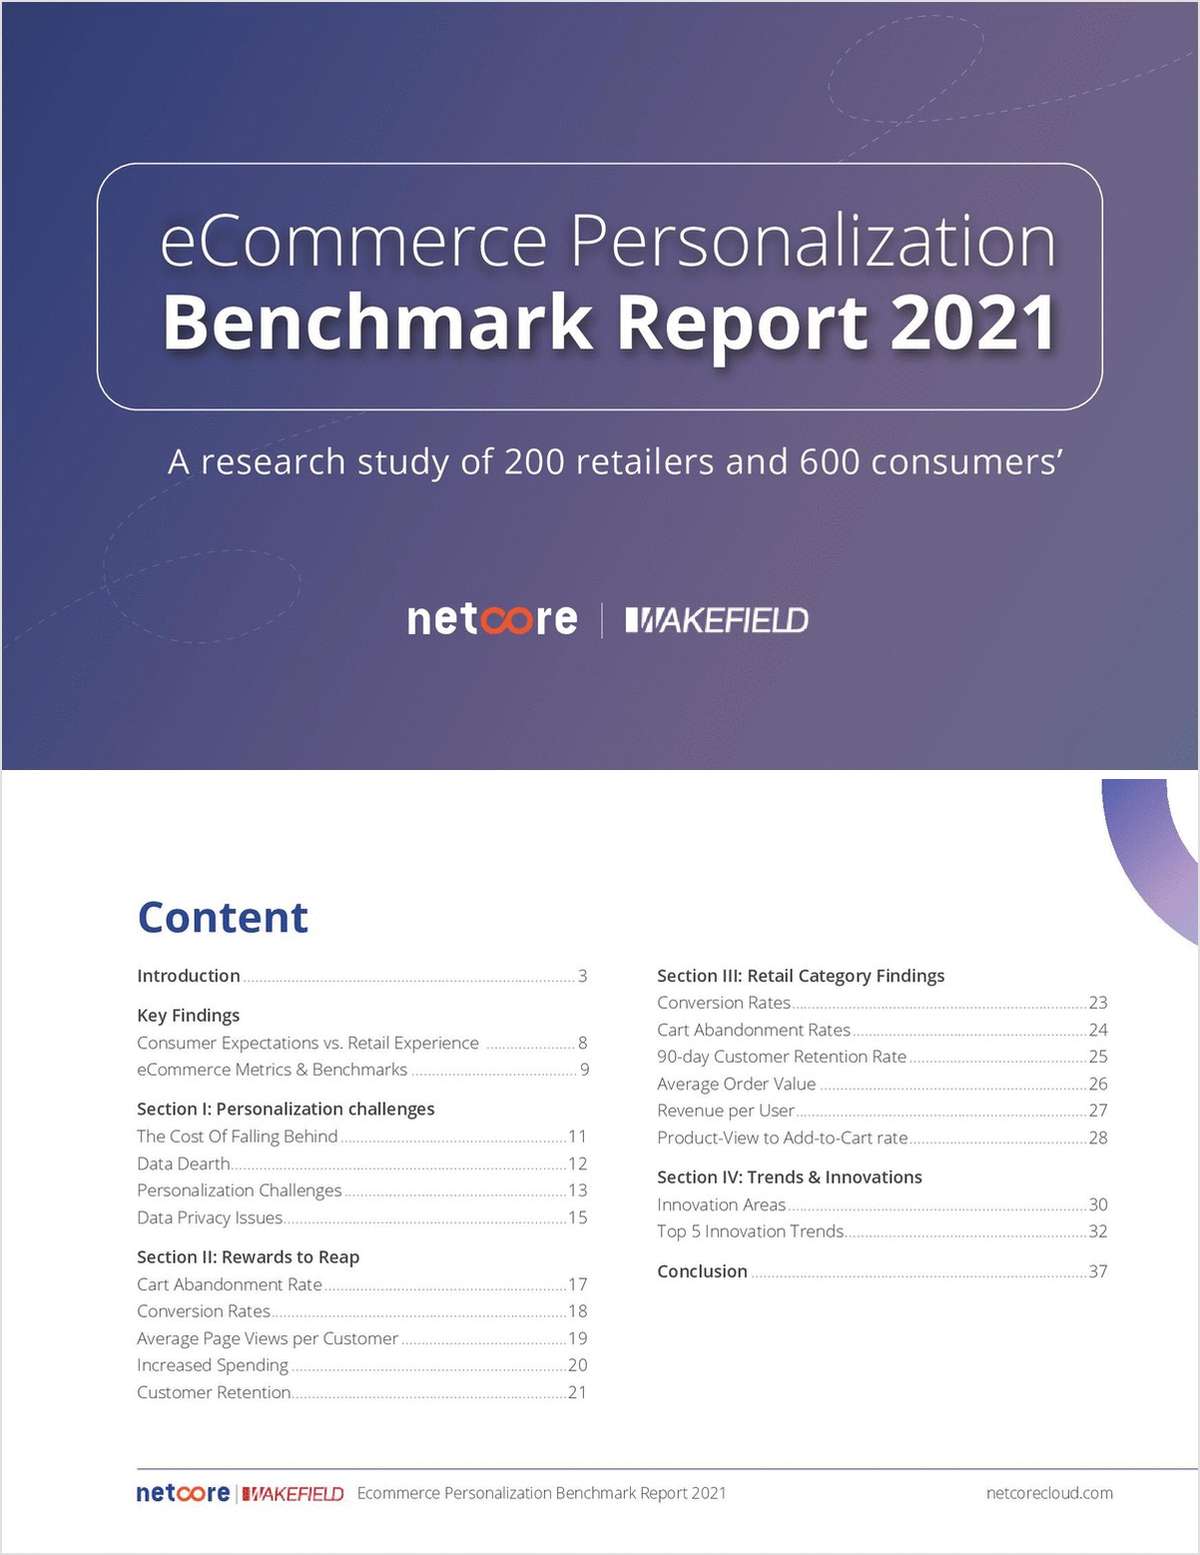 Ecommerce Personalization Benchmark Report 2021